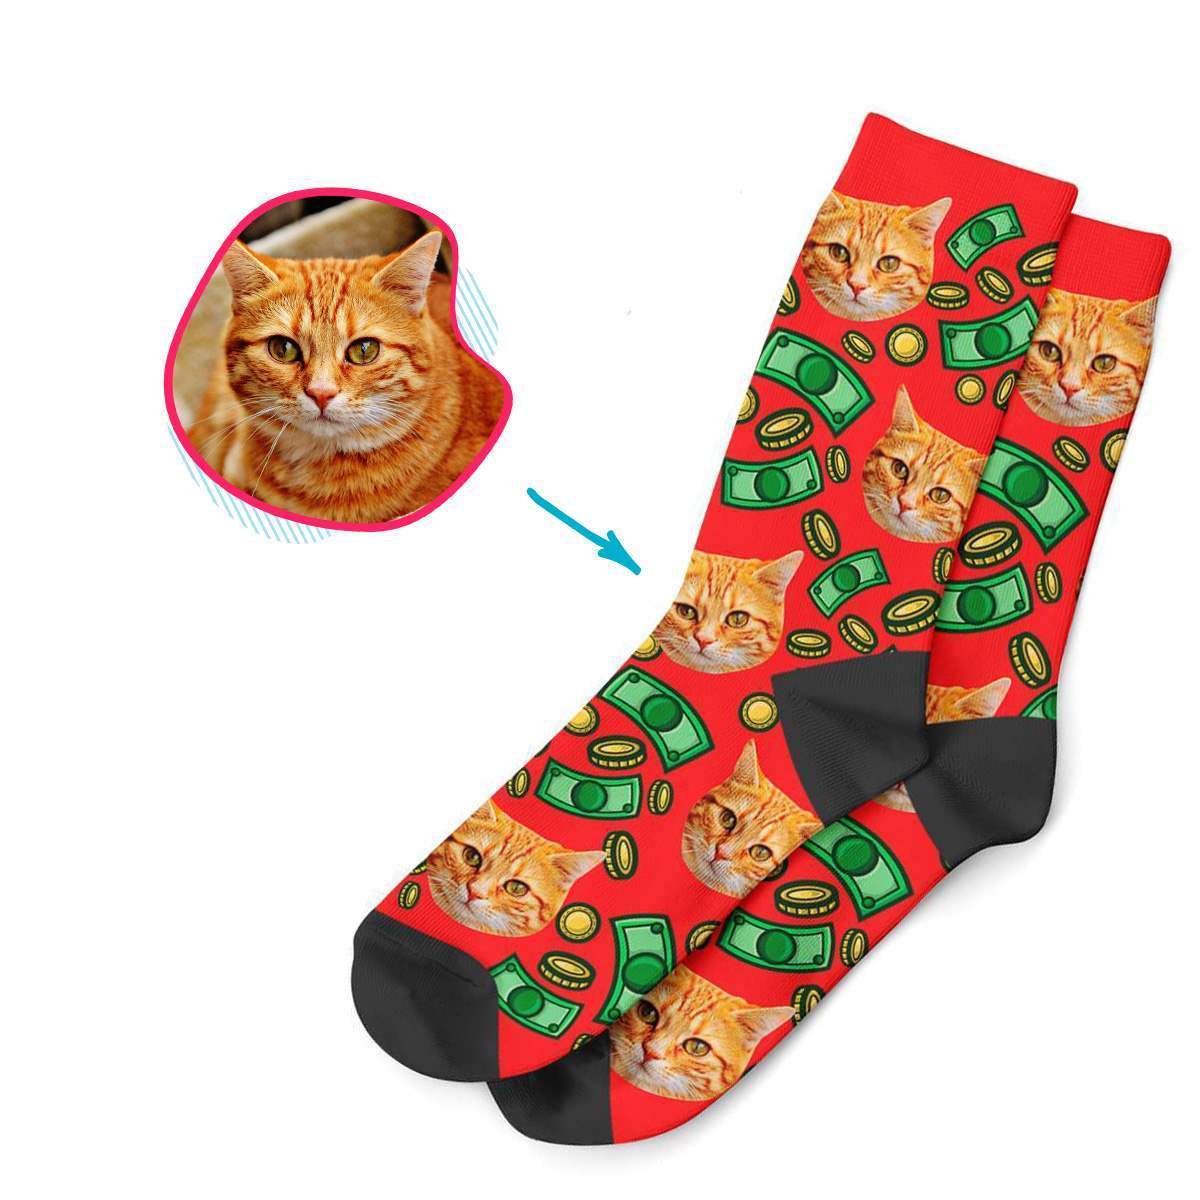 red Money socks personalized with photo of face printed on them